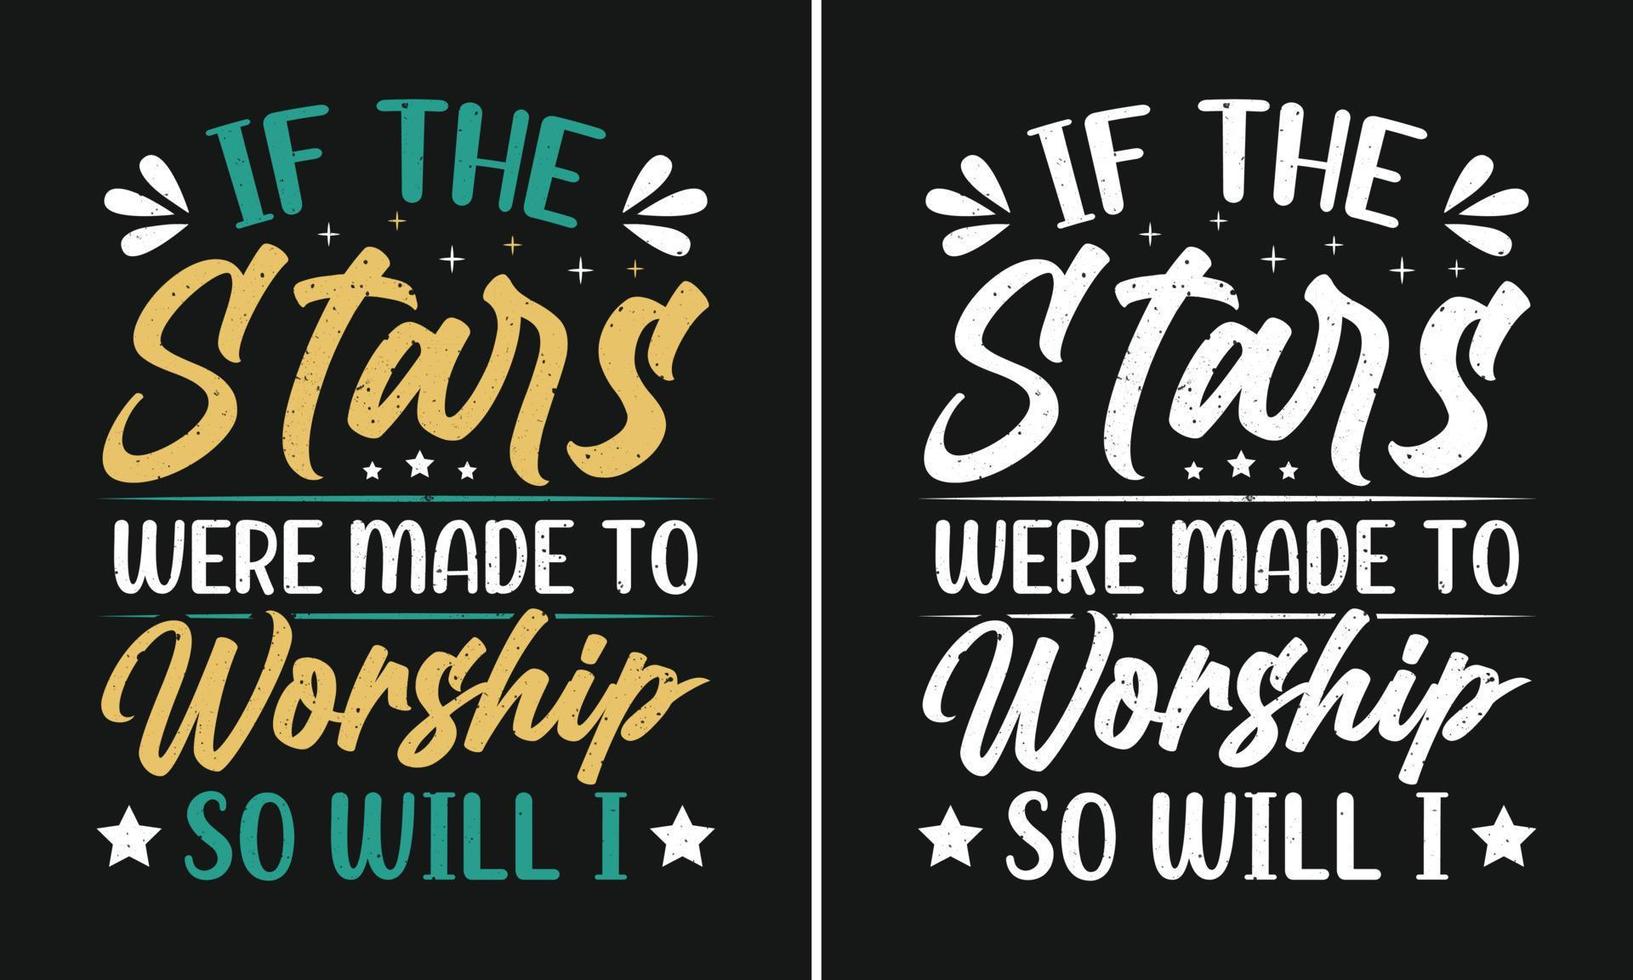 If the Stars were made to worship so will I t-shirt design, Bible verse, Scripture, Christian T-shirt, Religious, Quotes, Sayings, Typography Design, Vector